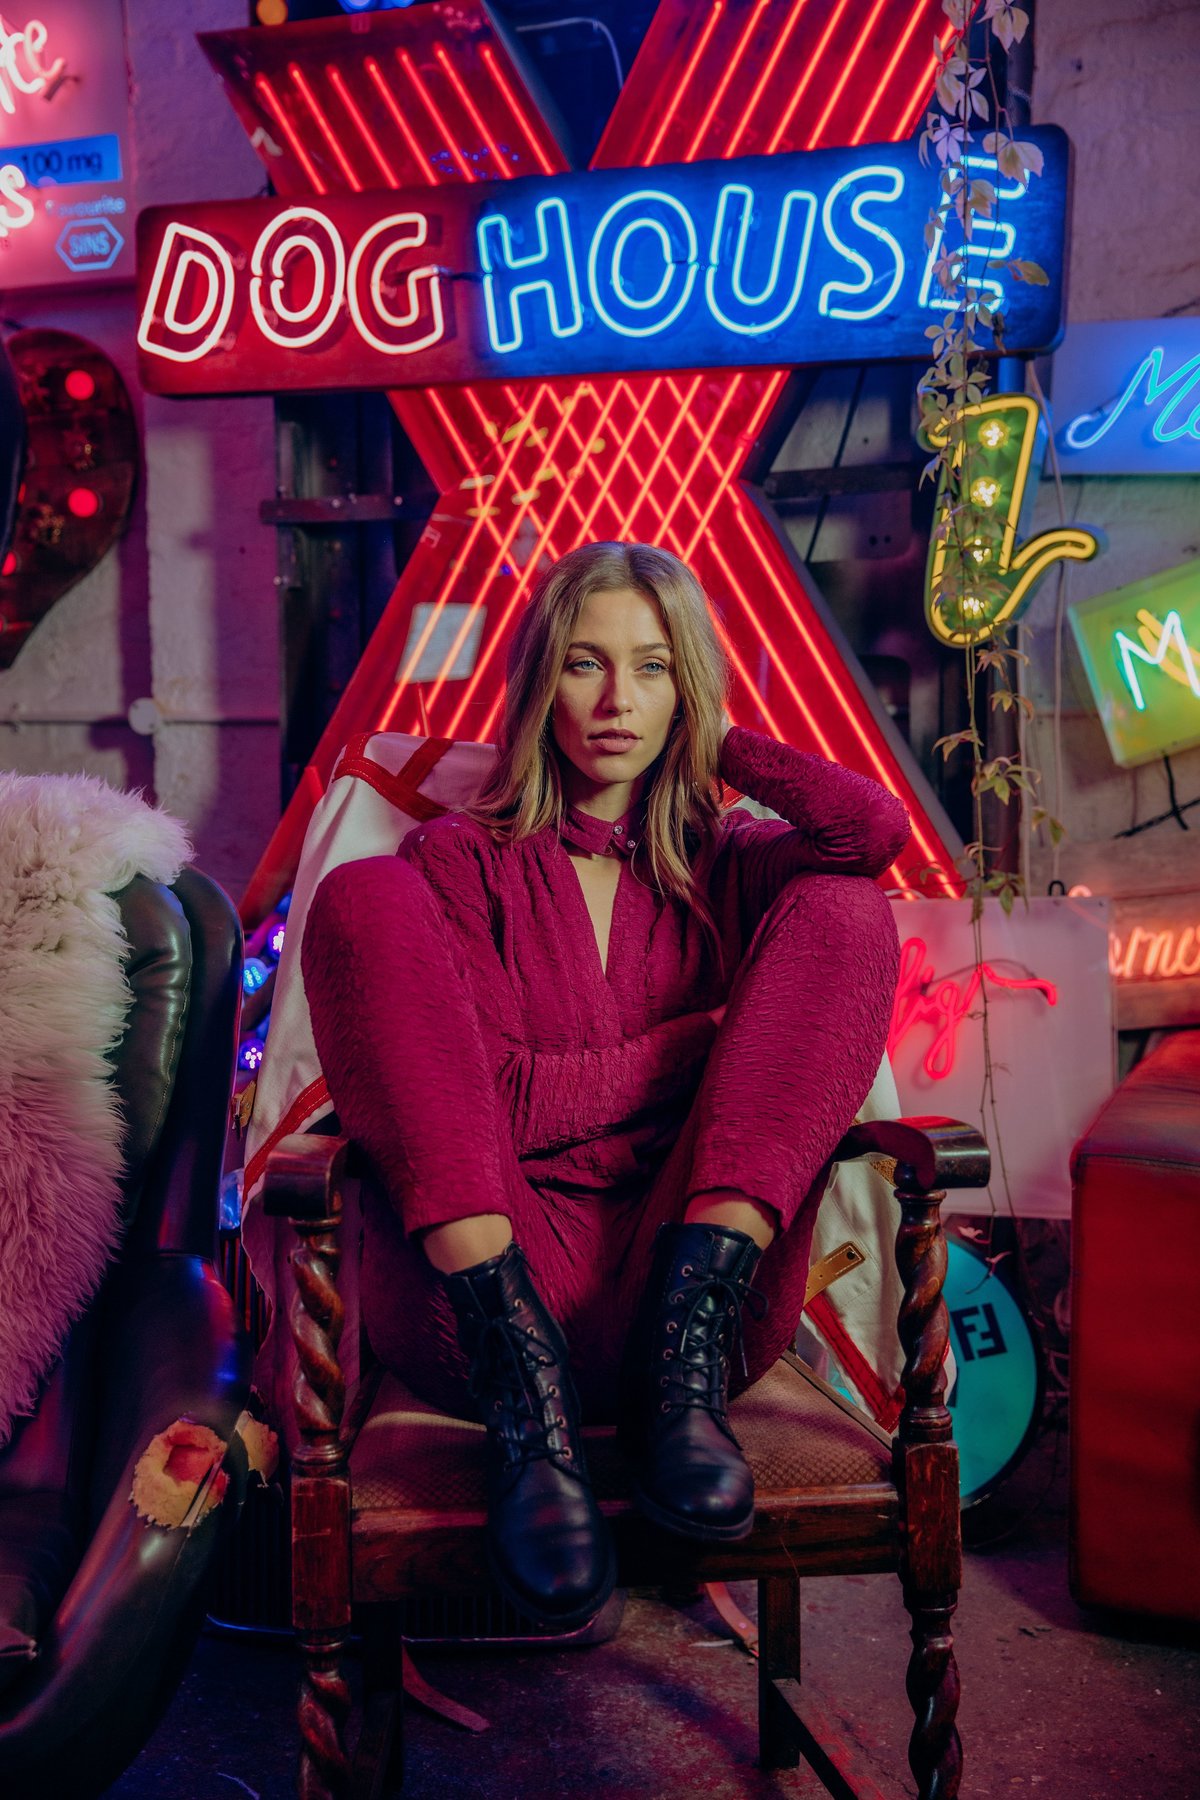 Anastazja sat in a chair, wearing a pink jumpsuit infront of an X shaped neon sign